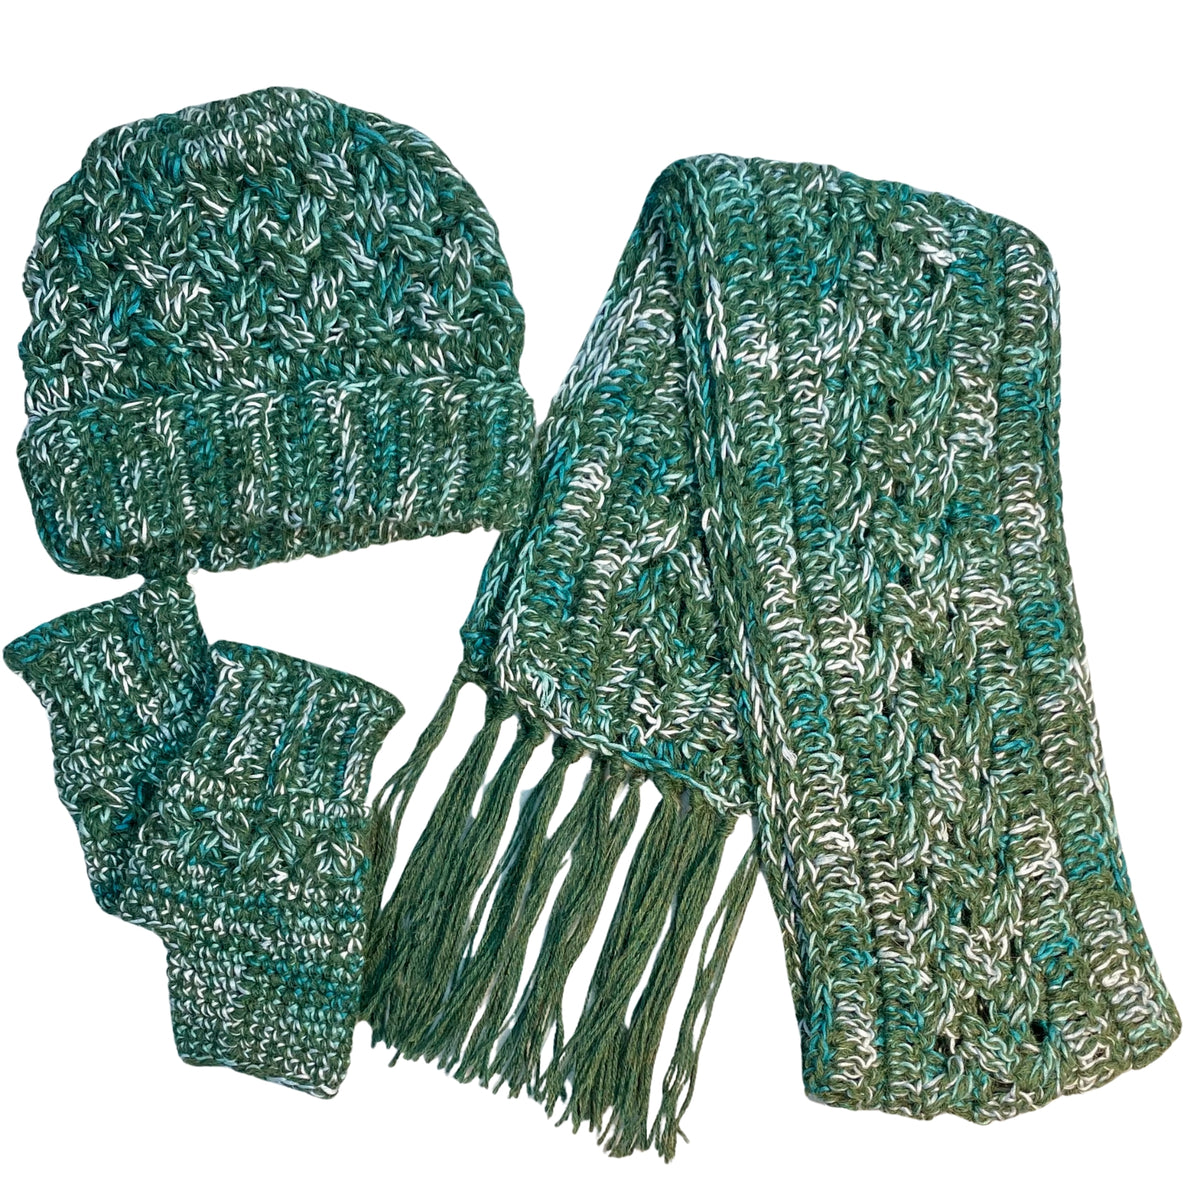 Cozy soft warm alpaca and bamboo matching set of celtic pattern hat, scarf with long tassels, and fingerless wristie mittens for winter fashion. Handmade knitted crochet items made from yarn in the colors moss green, teal, turquoise, seafoam, and white. 